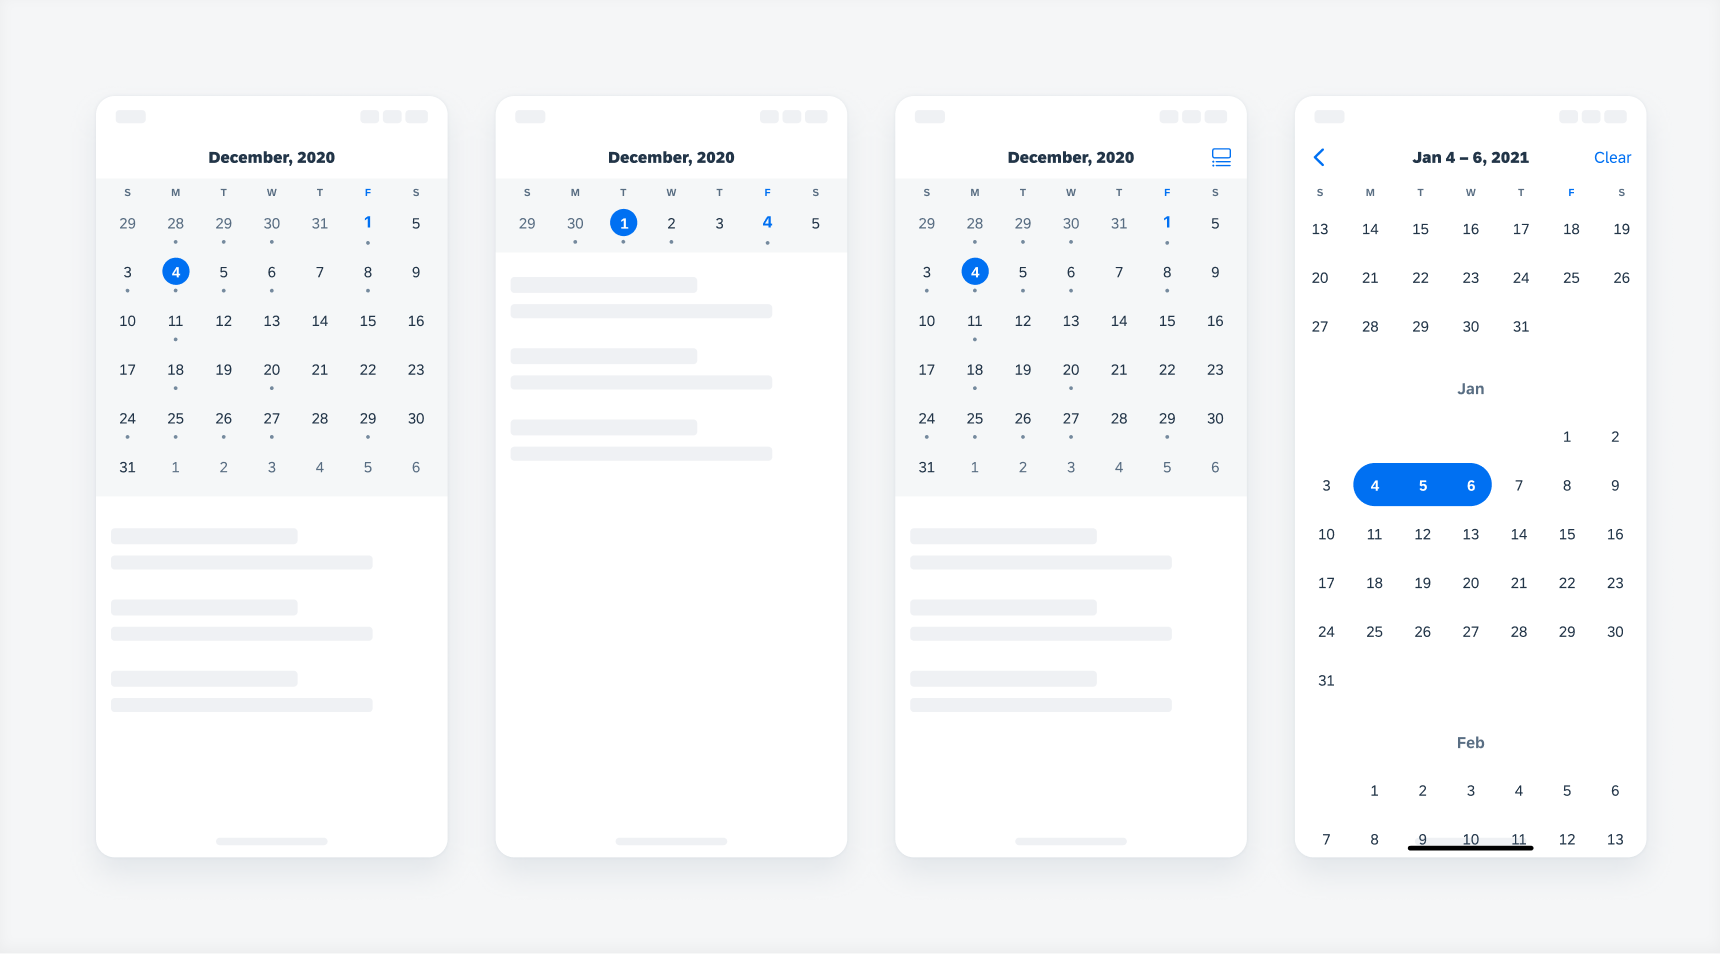 4 types of the calendar view containers: month view, week view, expandable view, and date selection view